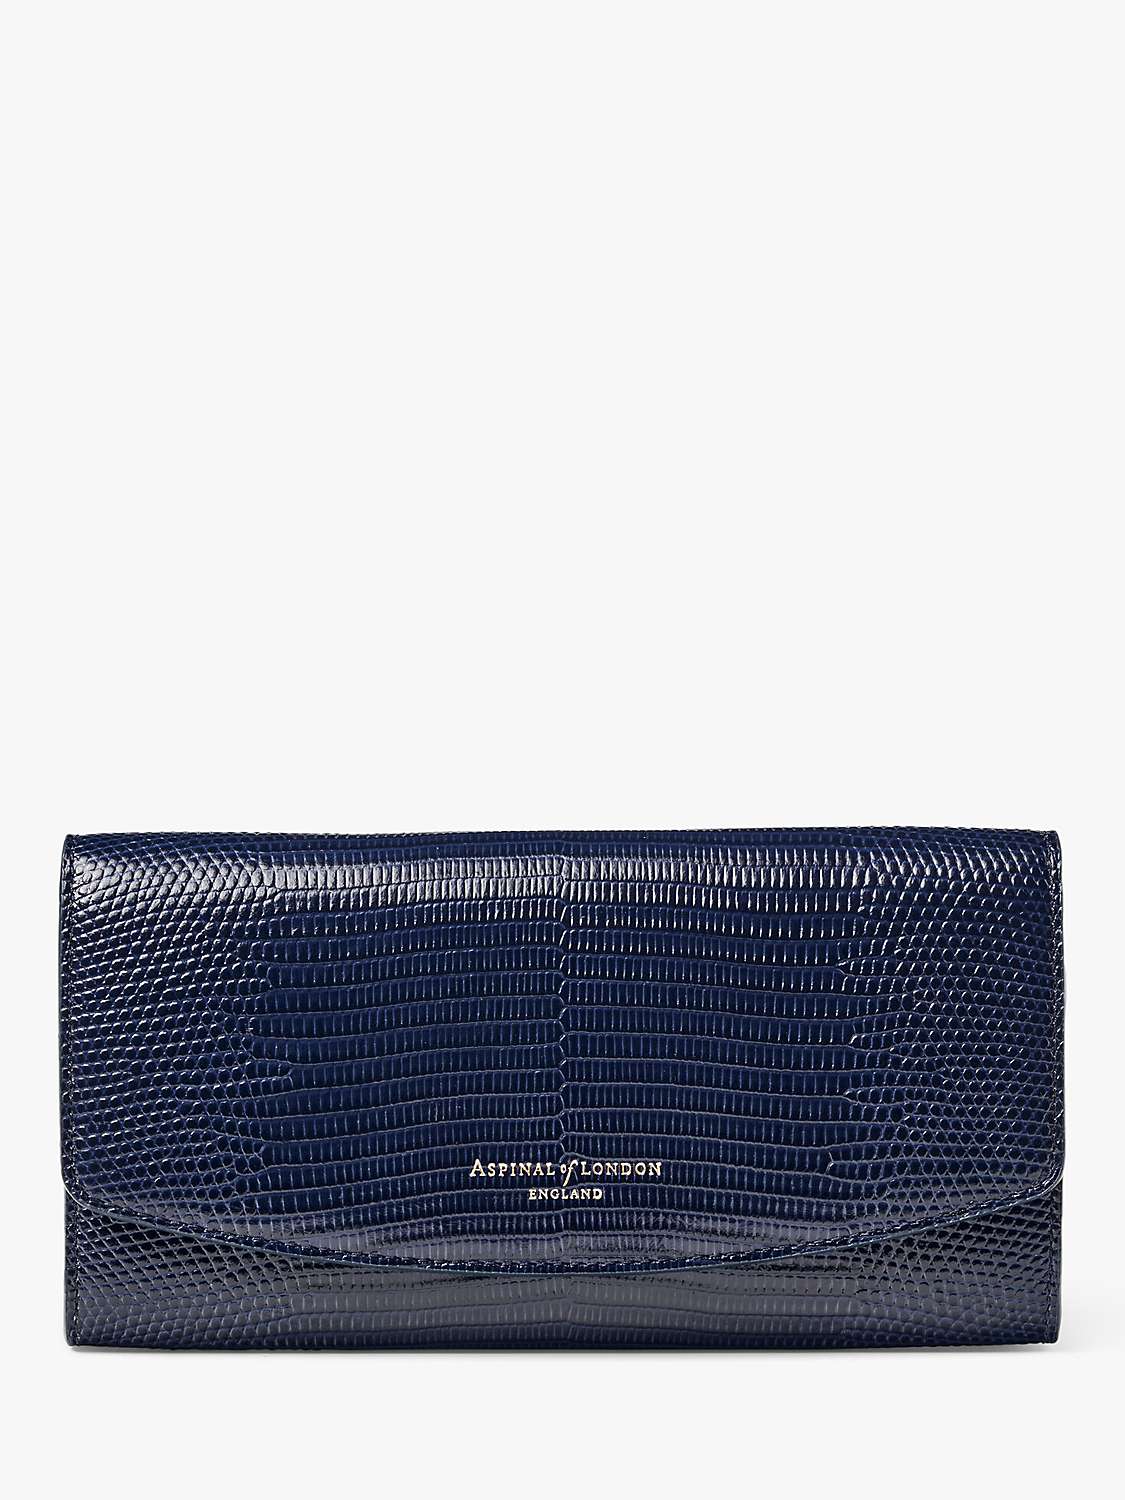 Buy Aspinal of London Leather Madison Purse Online at johnlewis.com